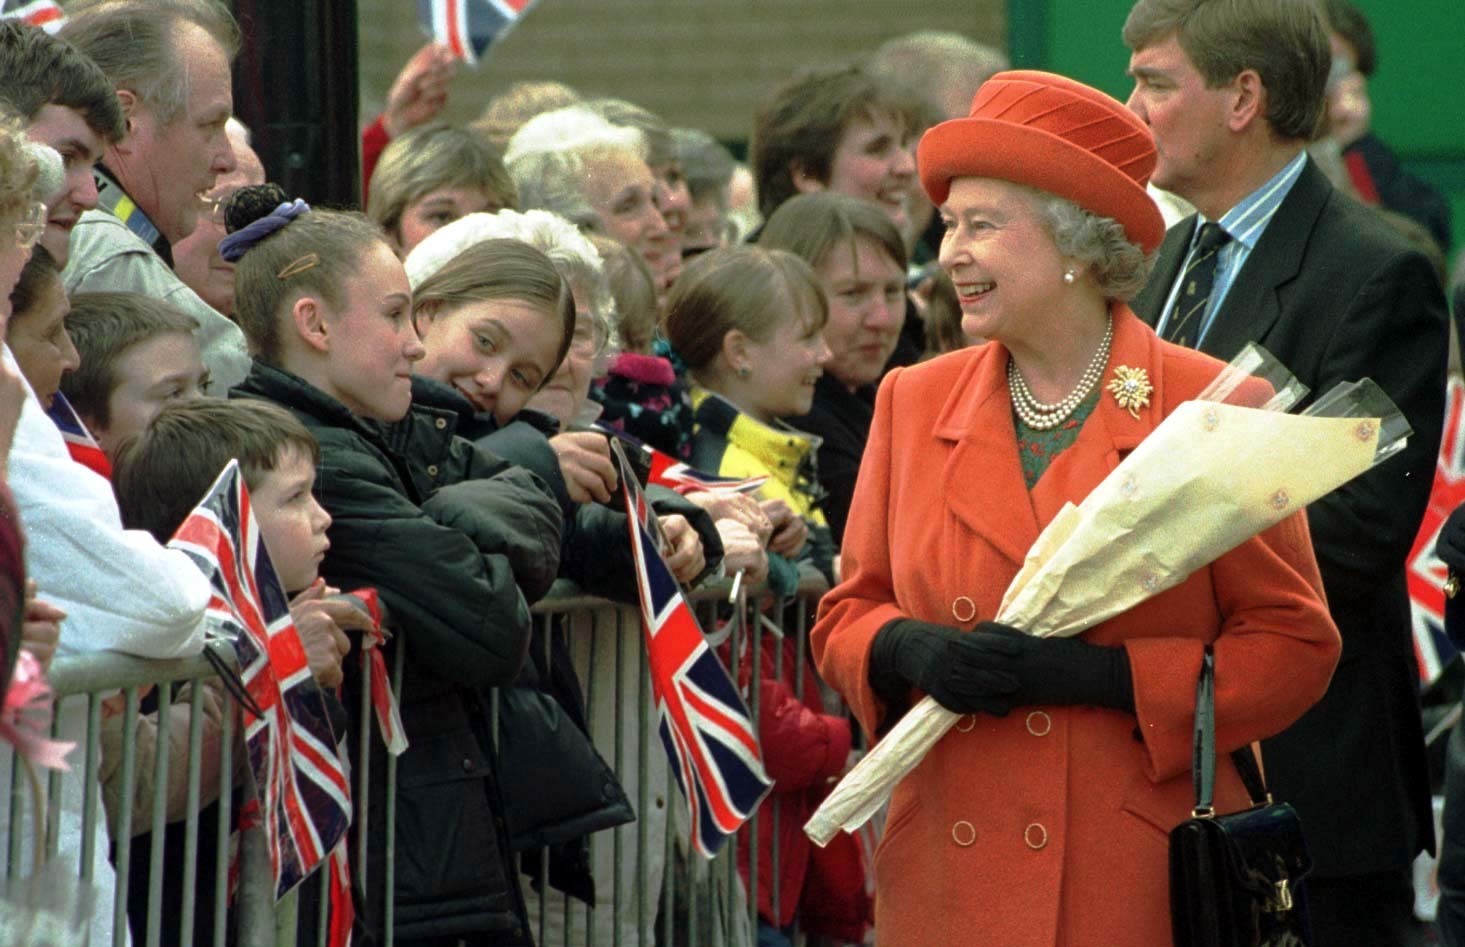 Meeting members of the community - the Queen walks in St Martins Square as part of her visit to Essex in March 1999